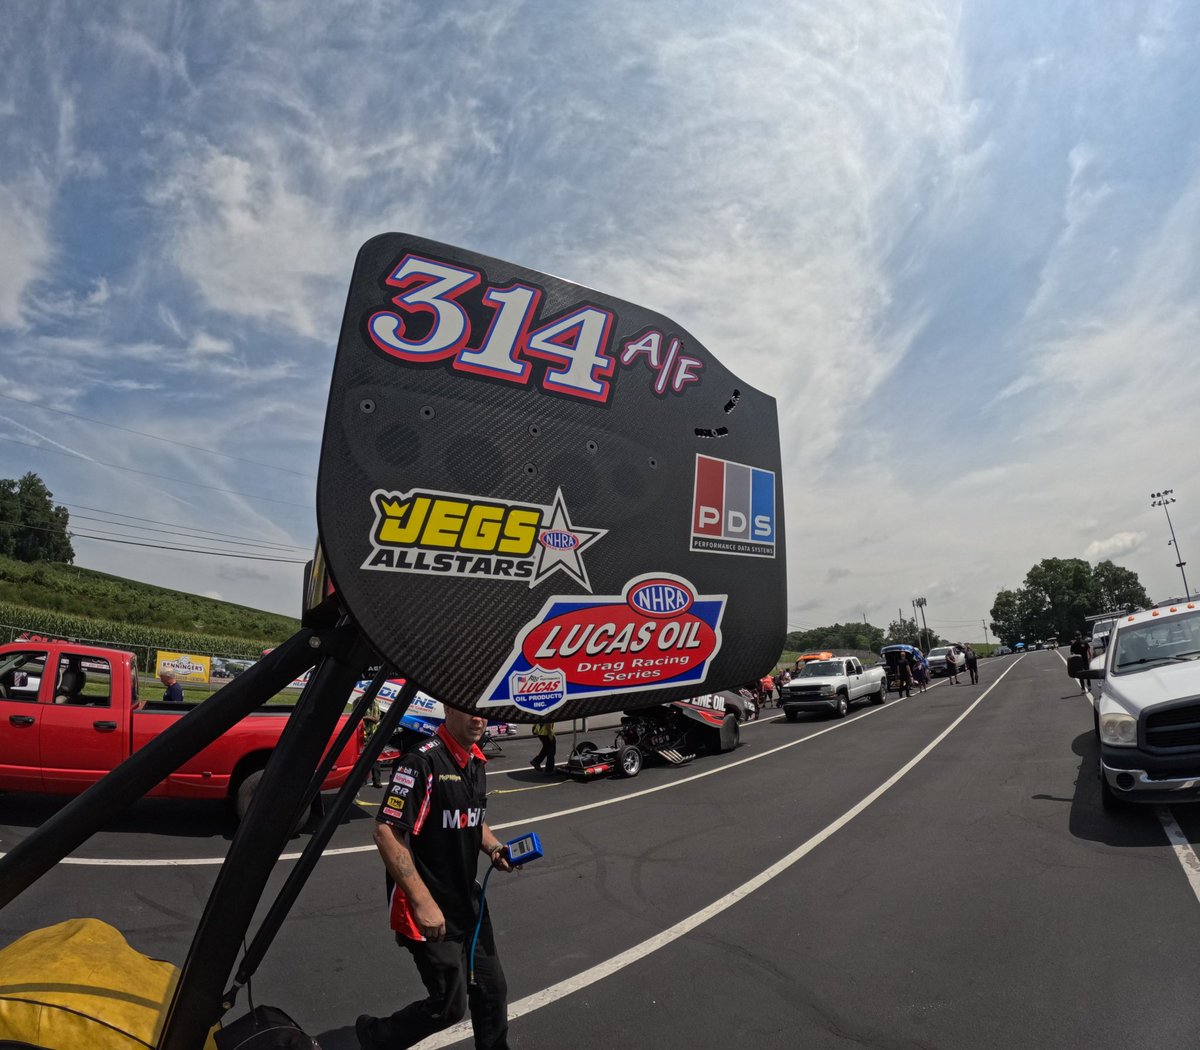 Not a bad rookie campaign for Tony Stewart In NHRA Top Alcohol Dragster in 2023!

#TonyStewart #MattCummings #MapleGroveRaceway #LODRS #LucasOil #DragRacing #Pennsylvania #TopAlcohol #NHRA #Wally #NED #McPhillipsRacing 

racingpromedia.com/post/tony-stew…